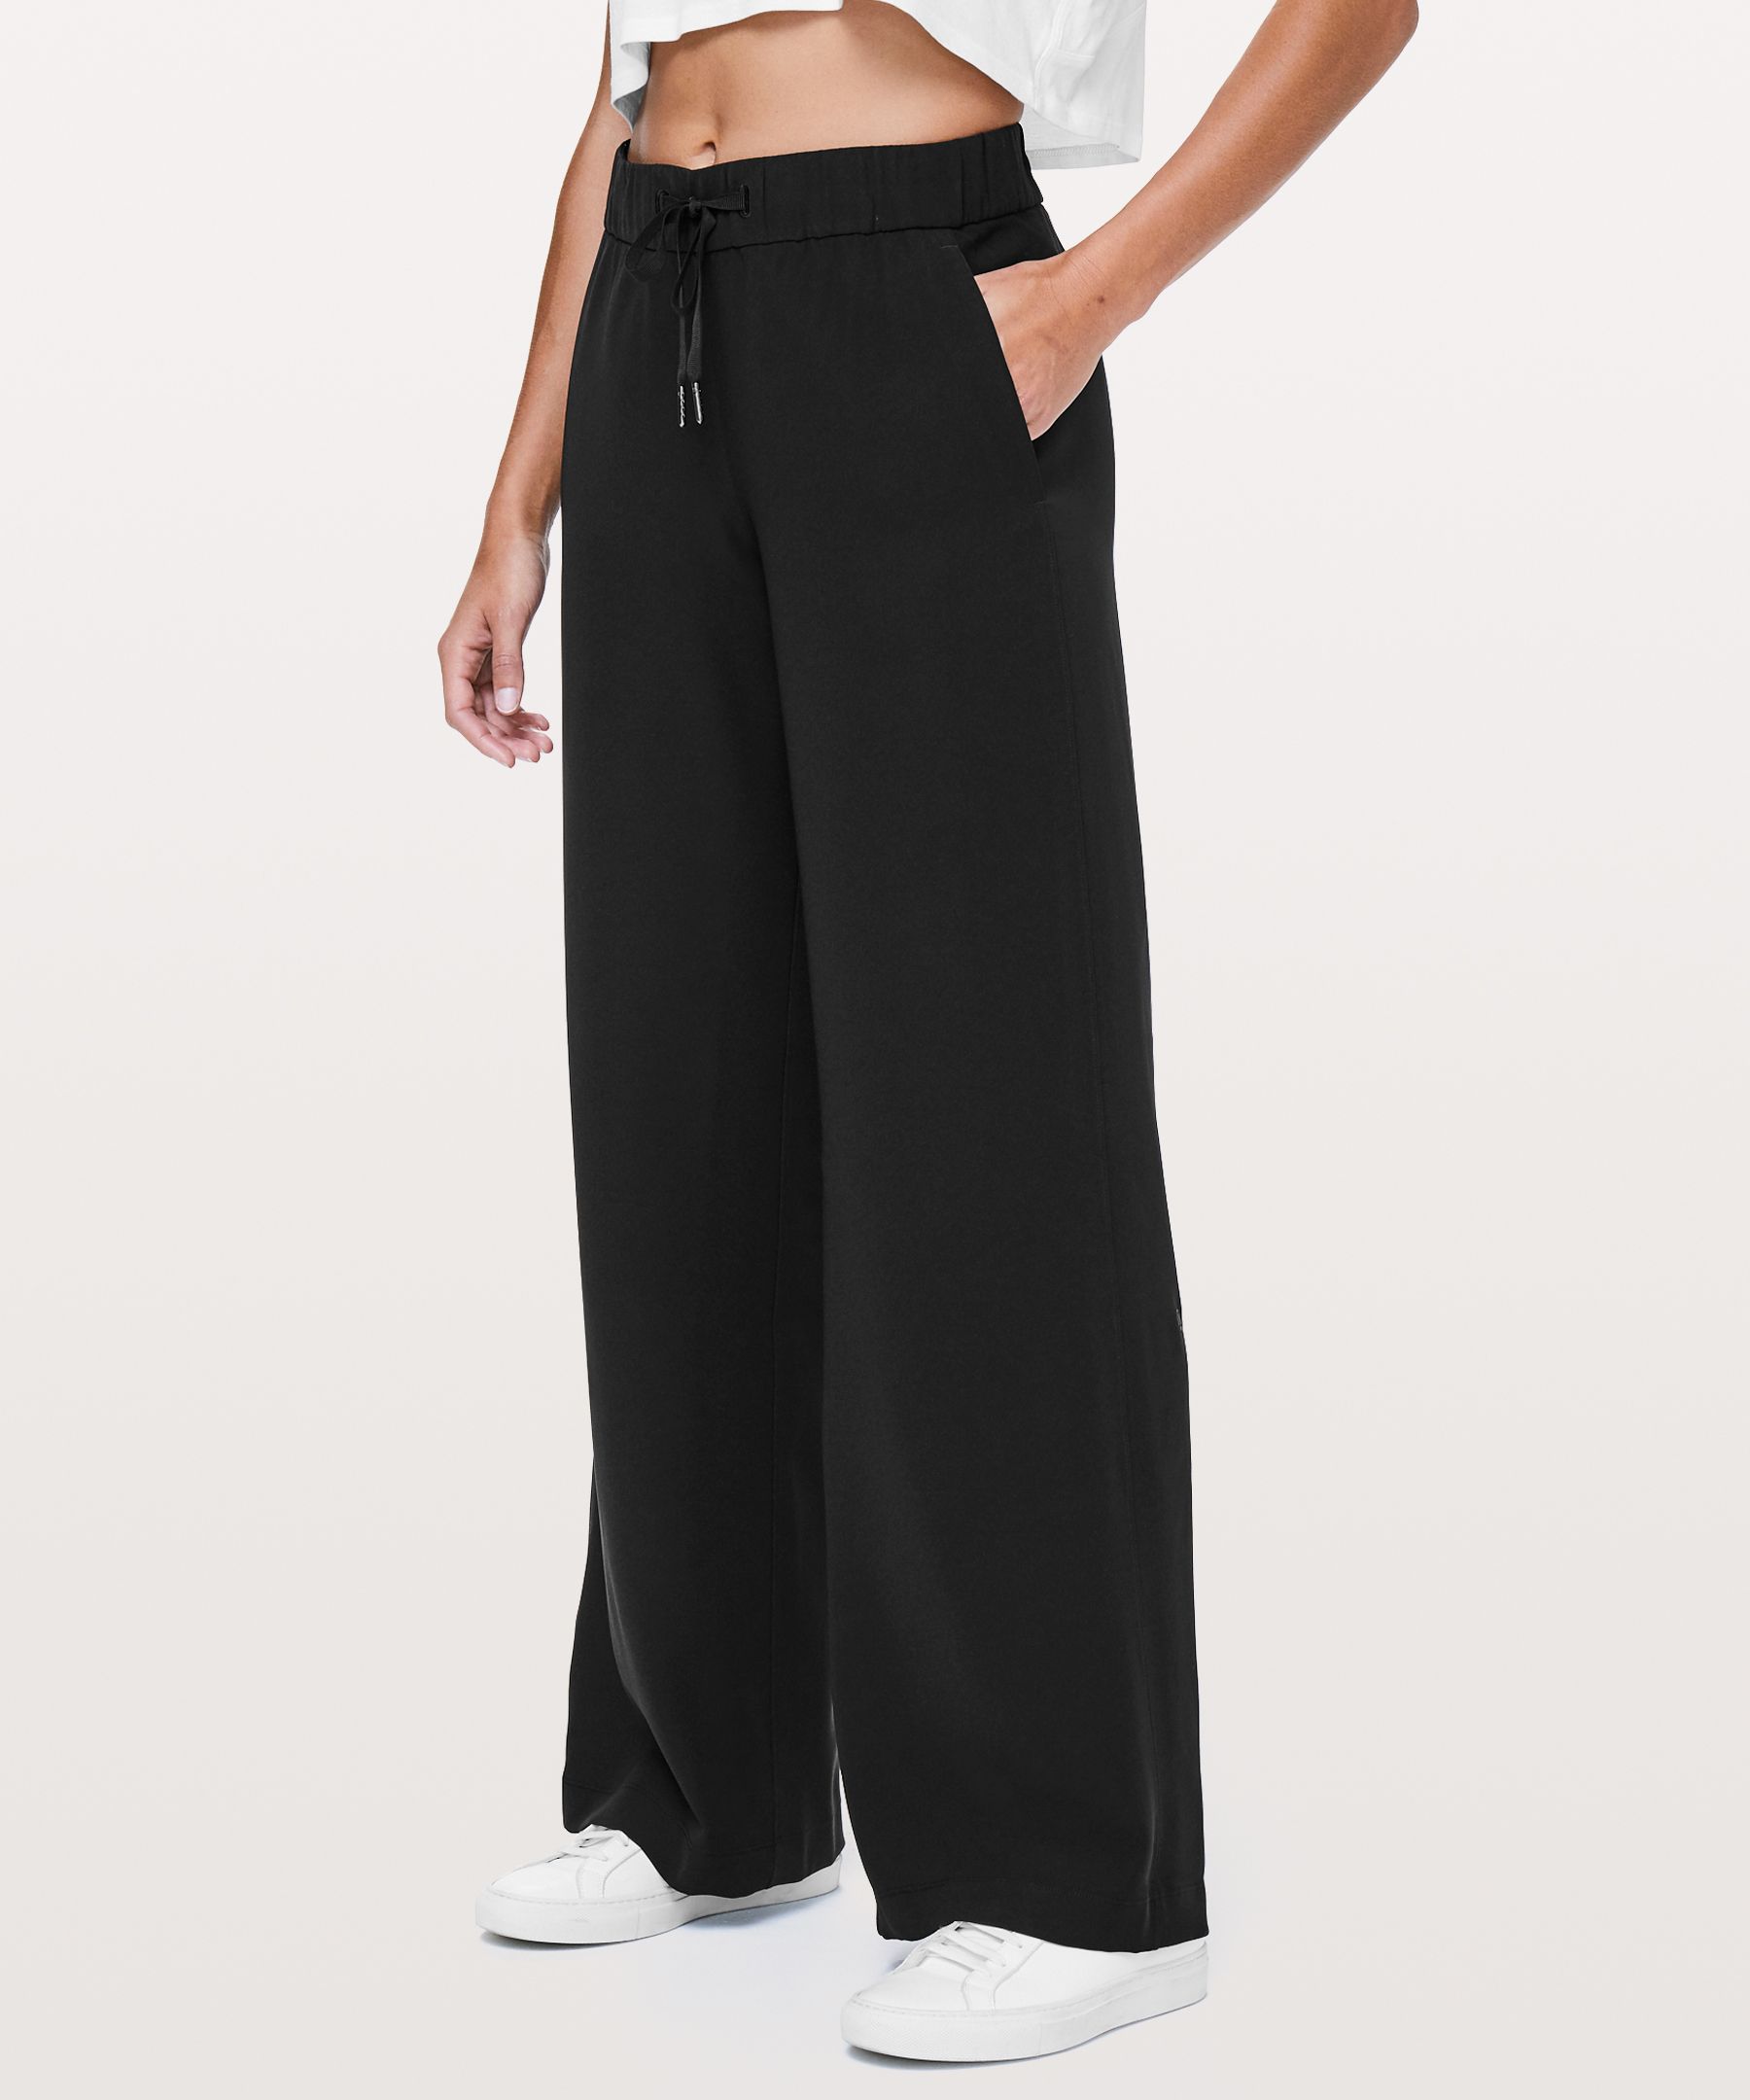 Lululemon On the Fly Wide Leg Pants Size 0 - $44 (62% Off Retail) - From  maddy